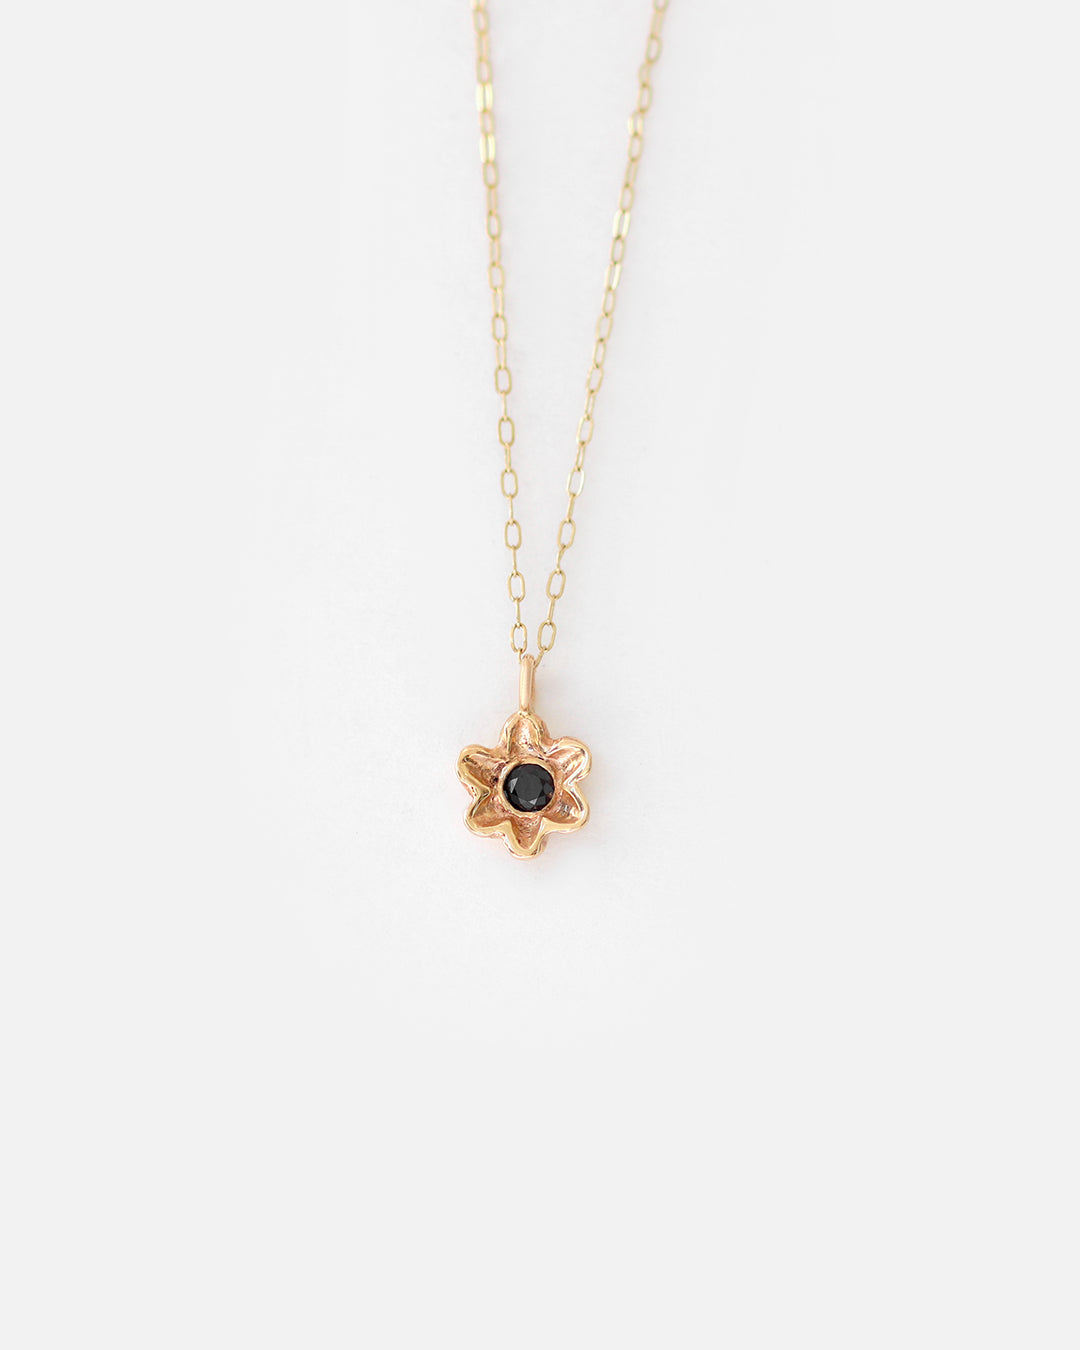 Flower / Pendant By O Channell Designs